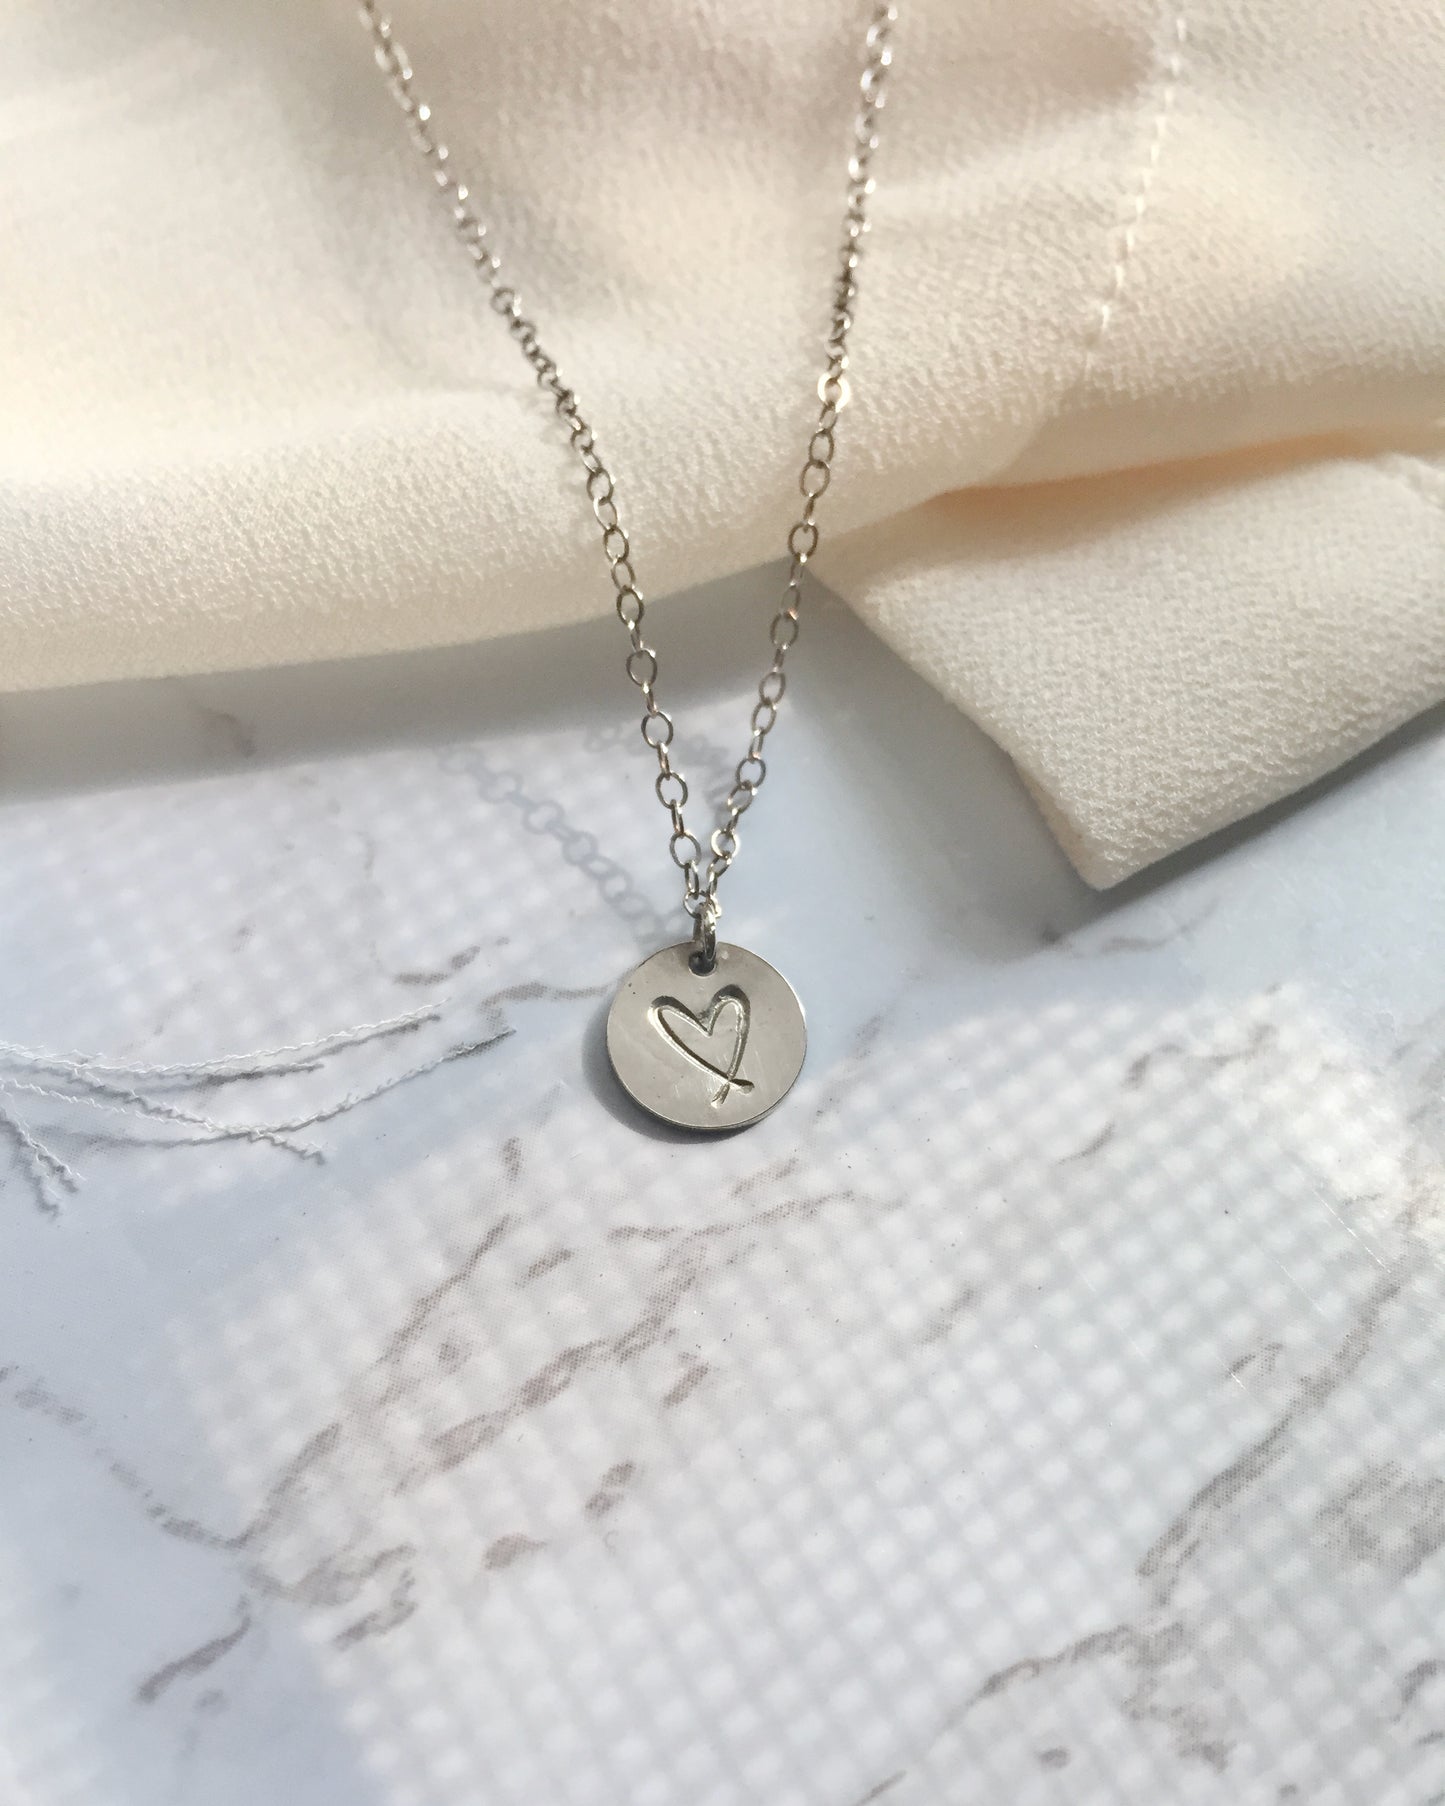 Small Heart Necklace In Gold Filled or Sterling Silver | Dainty Everyday Necklace | IB Jewelry